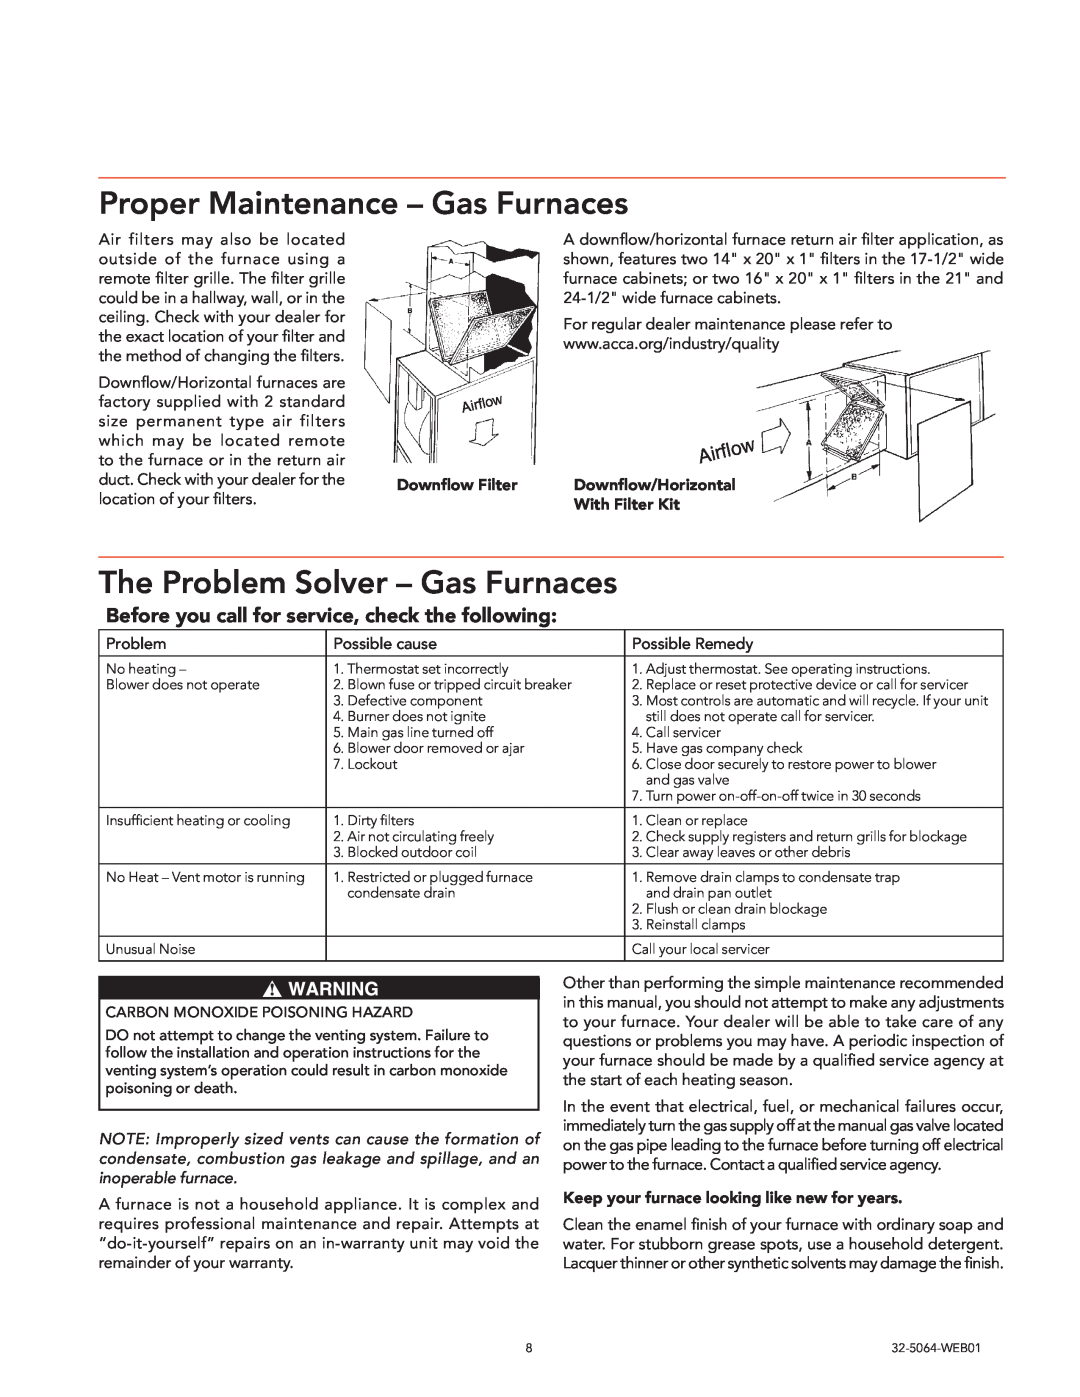 Trane 32-5064-WEB01 The Problem Solver - Gas Furnaces, Downflow Filter, Downflow/Horizontal, With Filter Kit, Airflow 